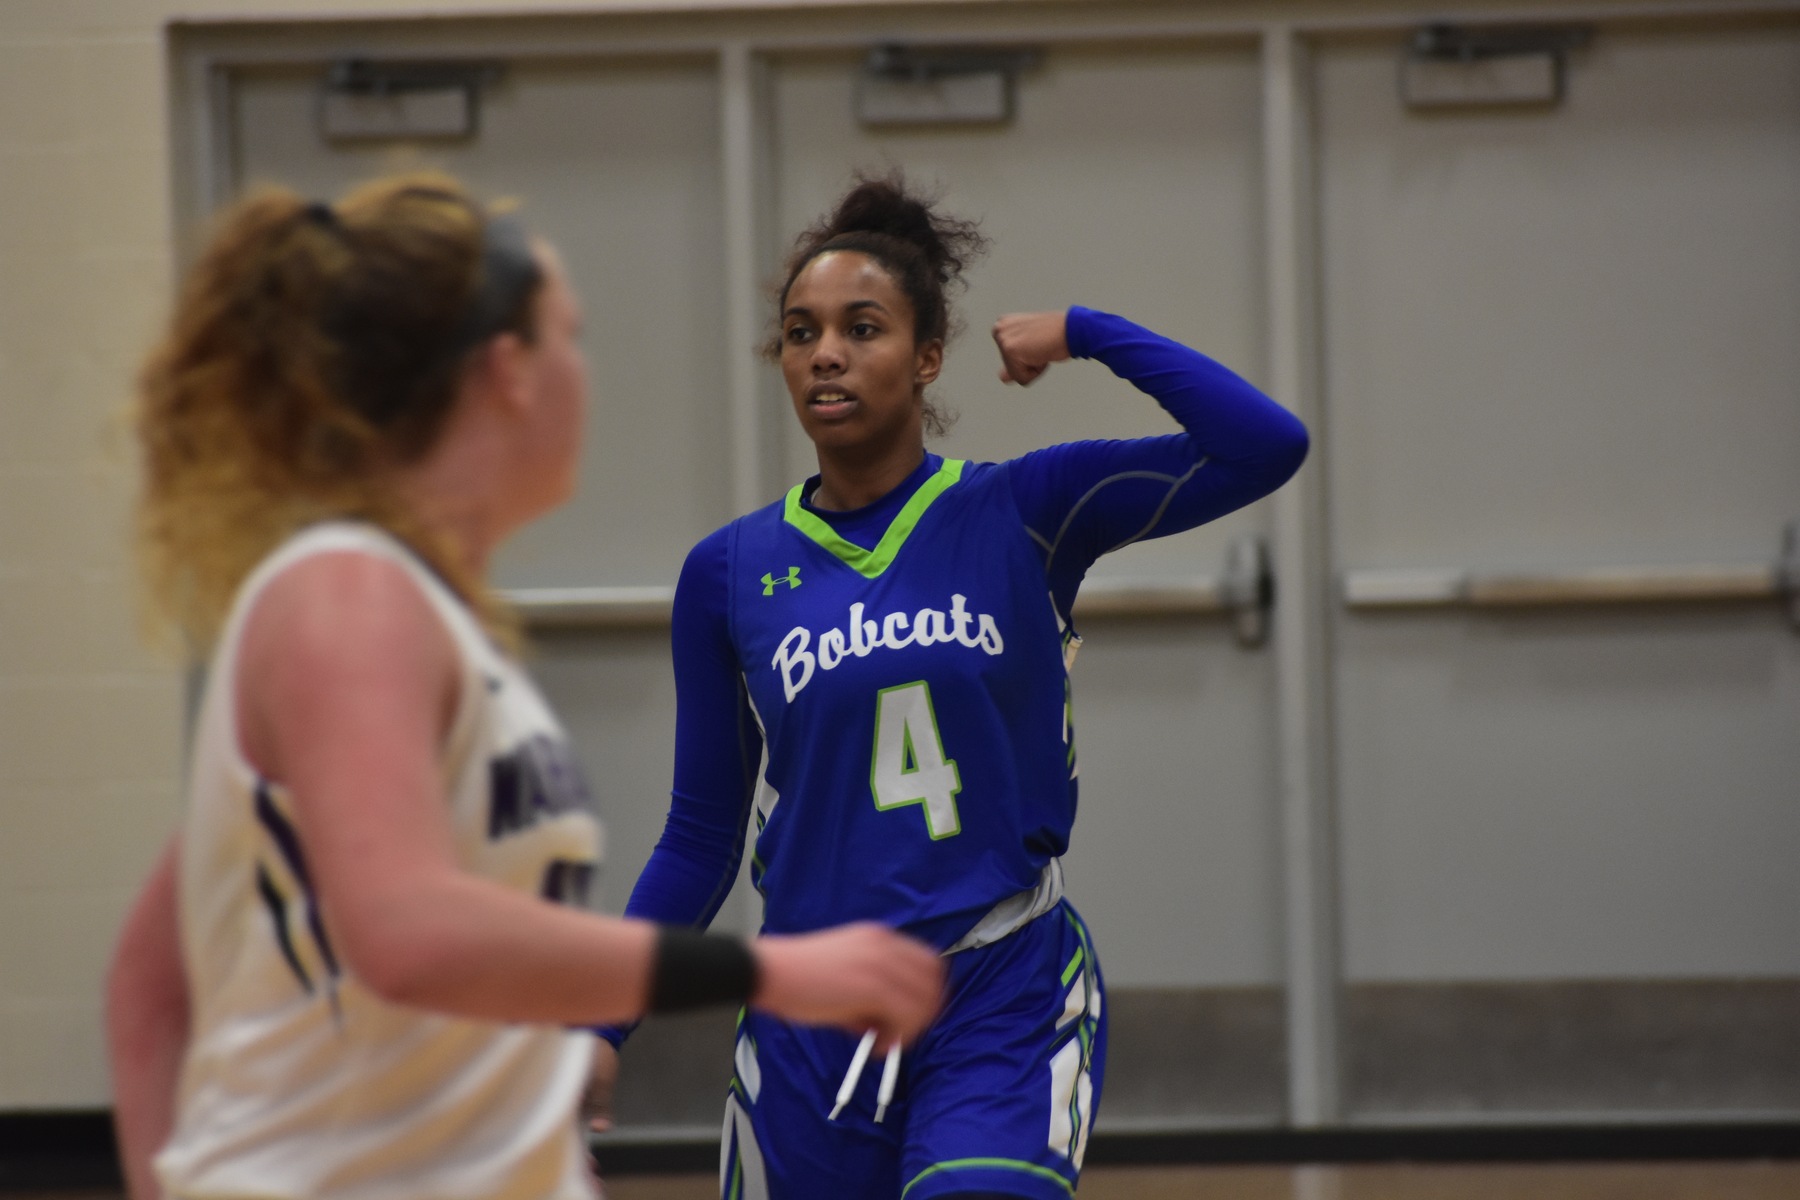 Jazlyn Drake (pictured) and the Lady Bobcats take down Loras College